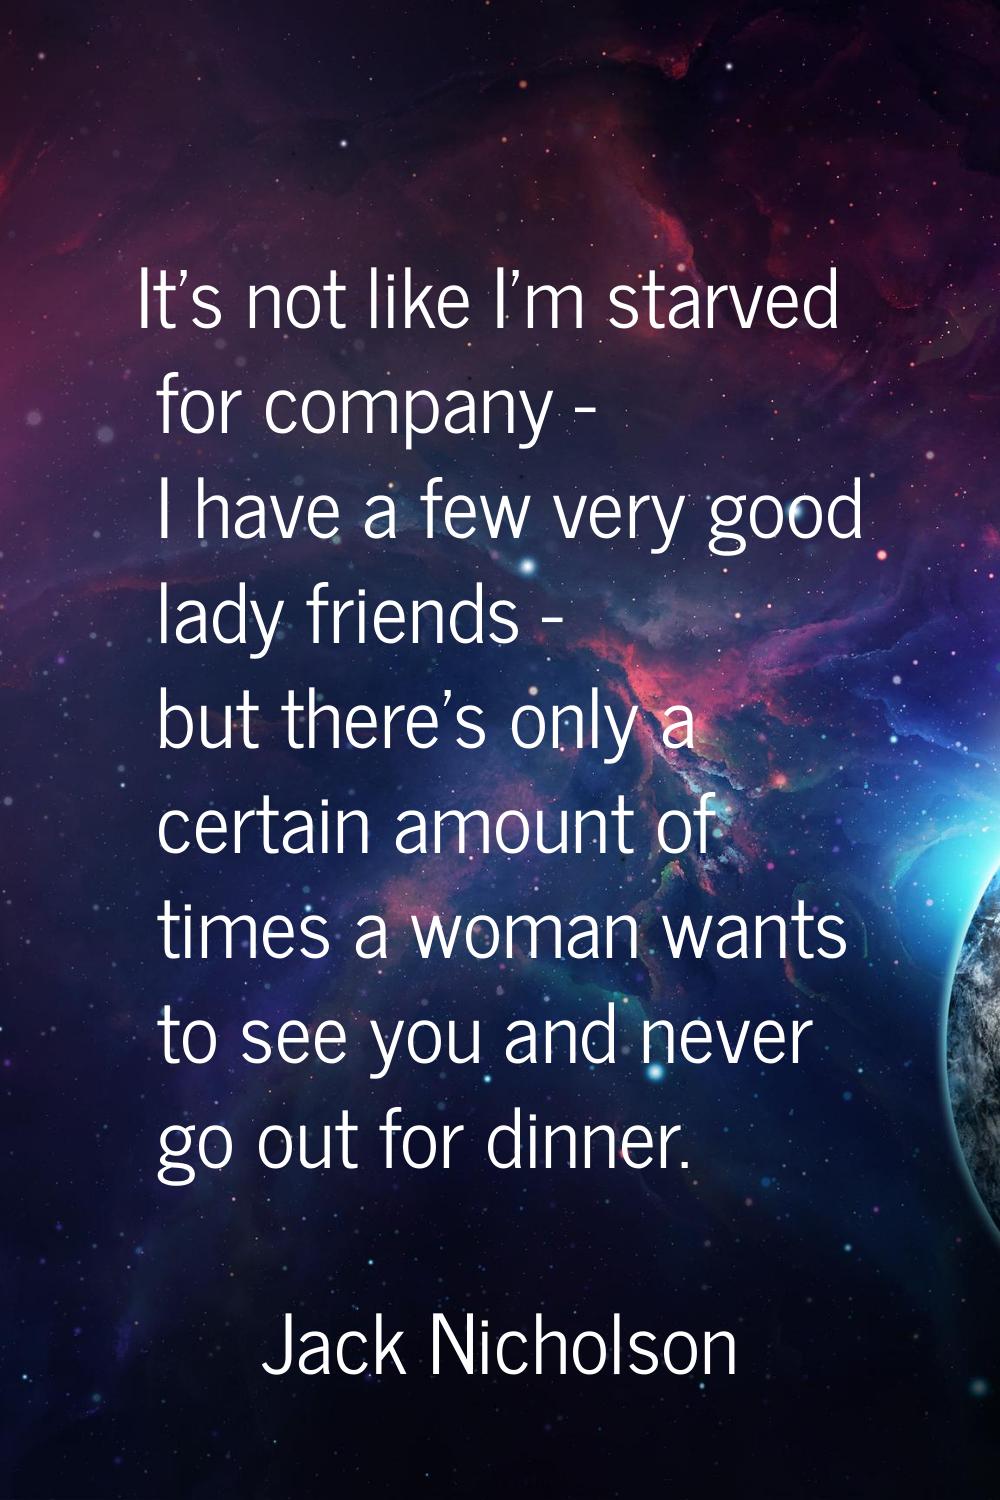 It's not like I'm starved for company - I have a few very good lady friends - but there's only a ce